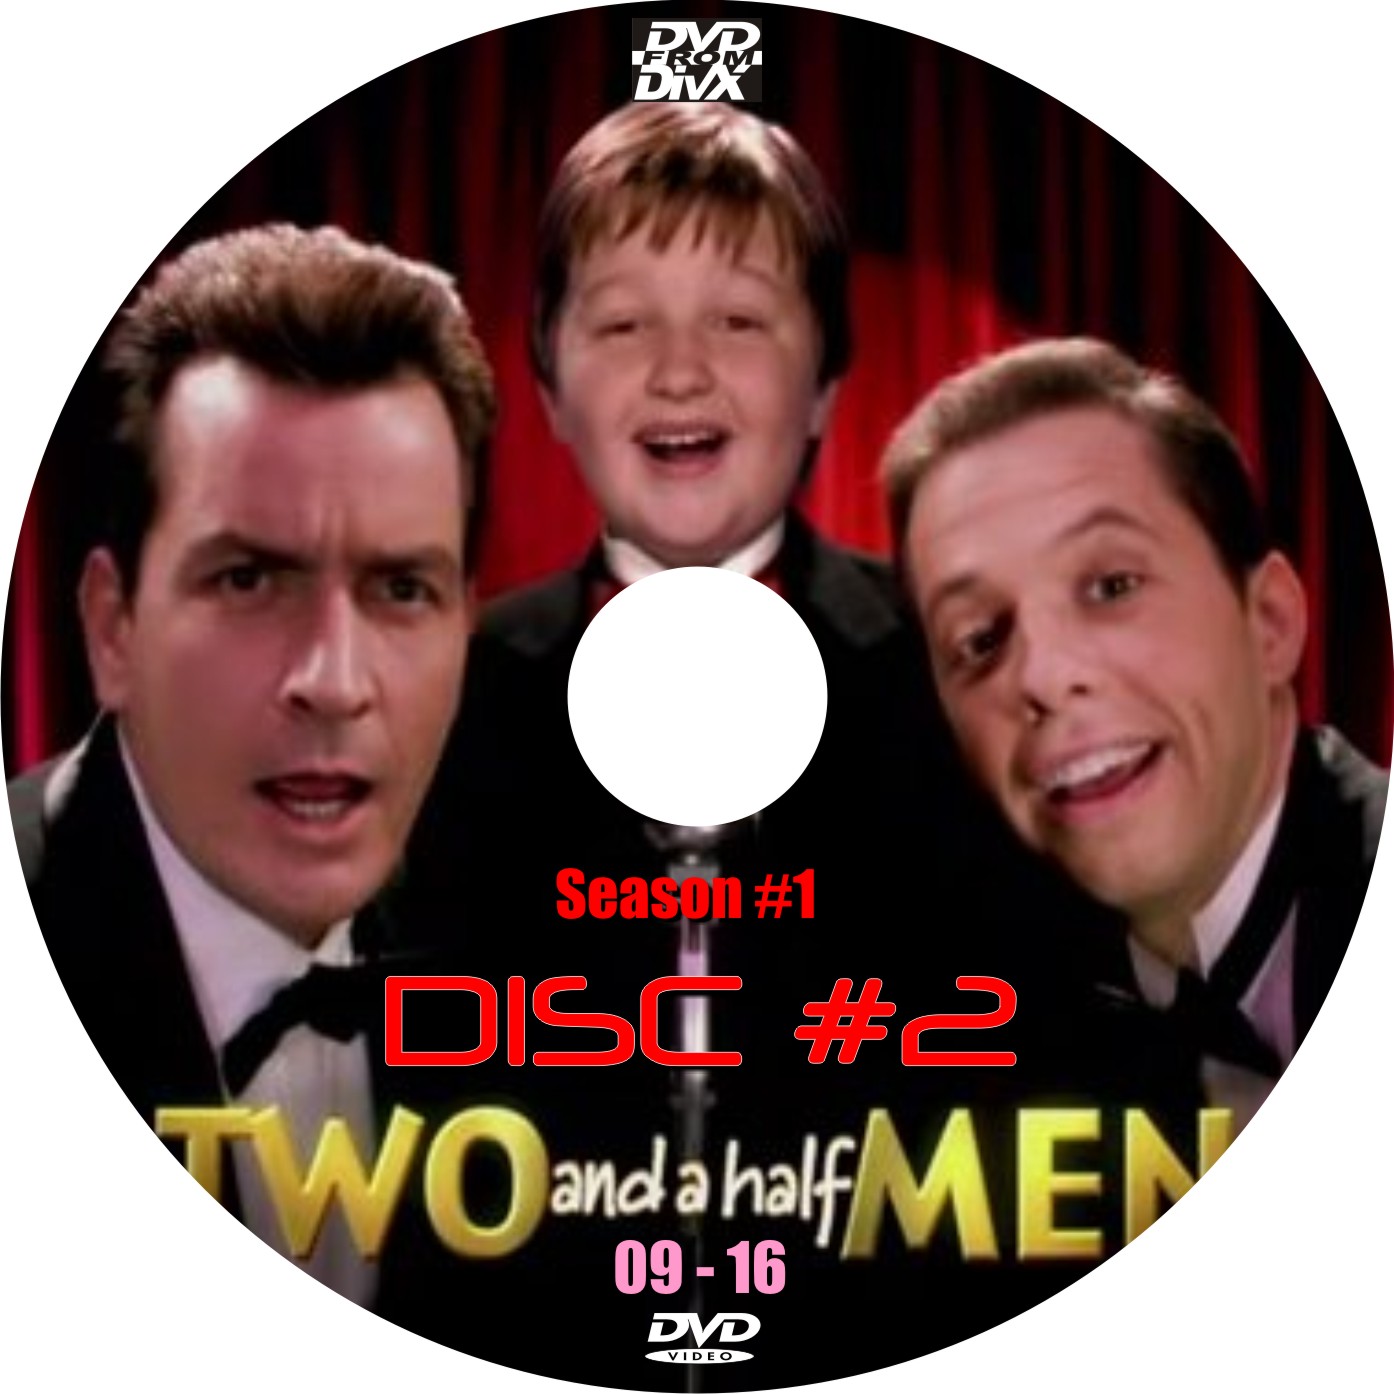 DVD_2andHalfMan_S1D2_Cover.jpg